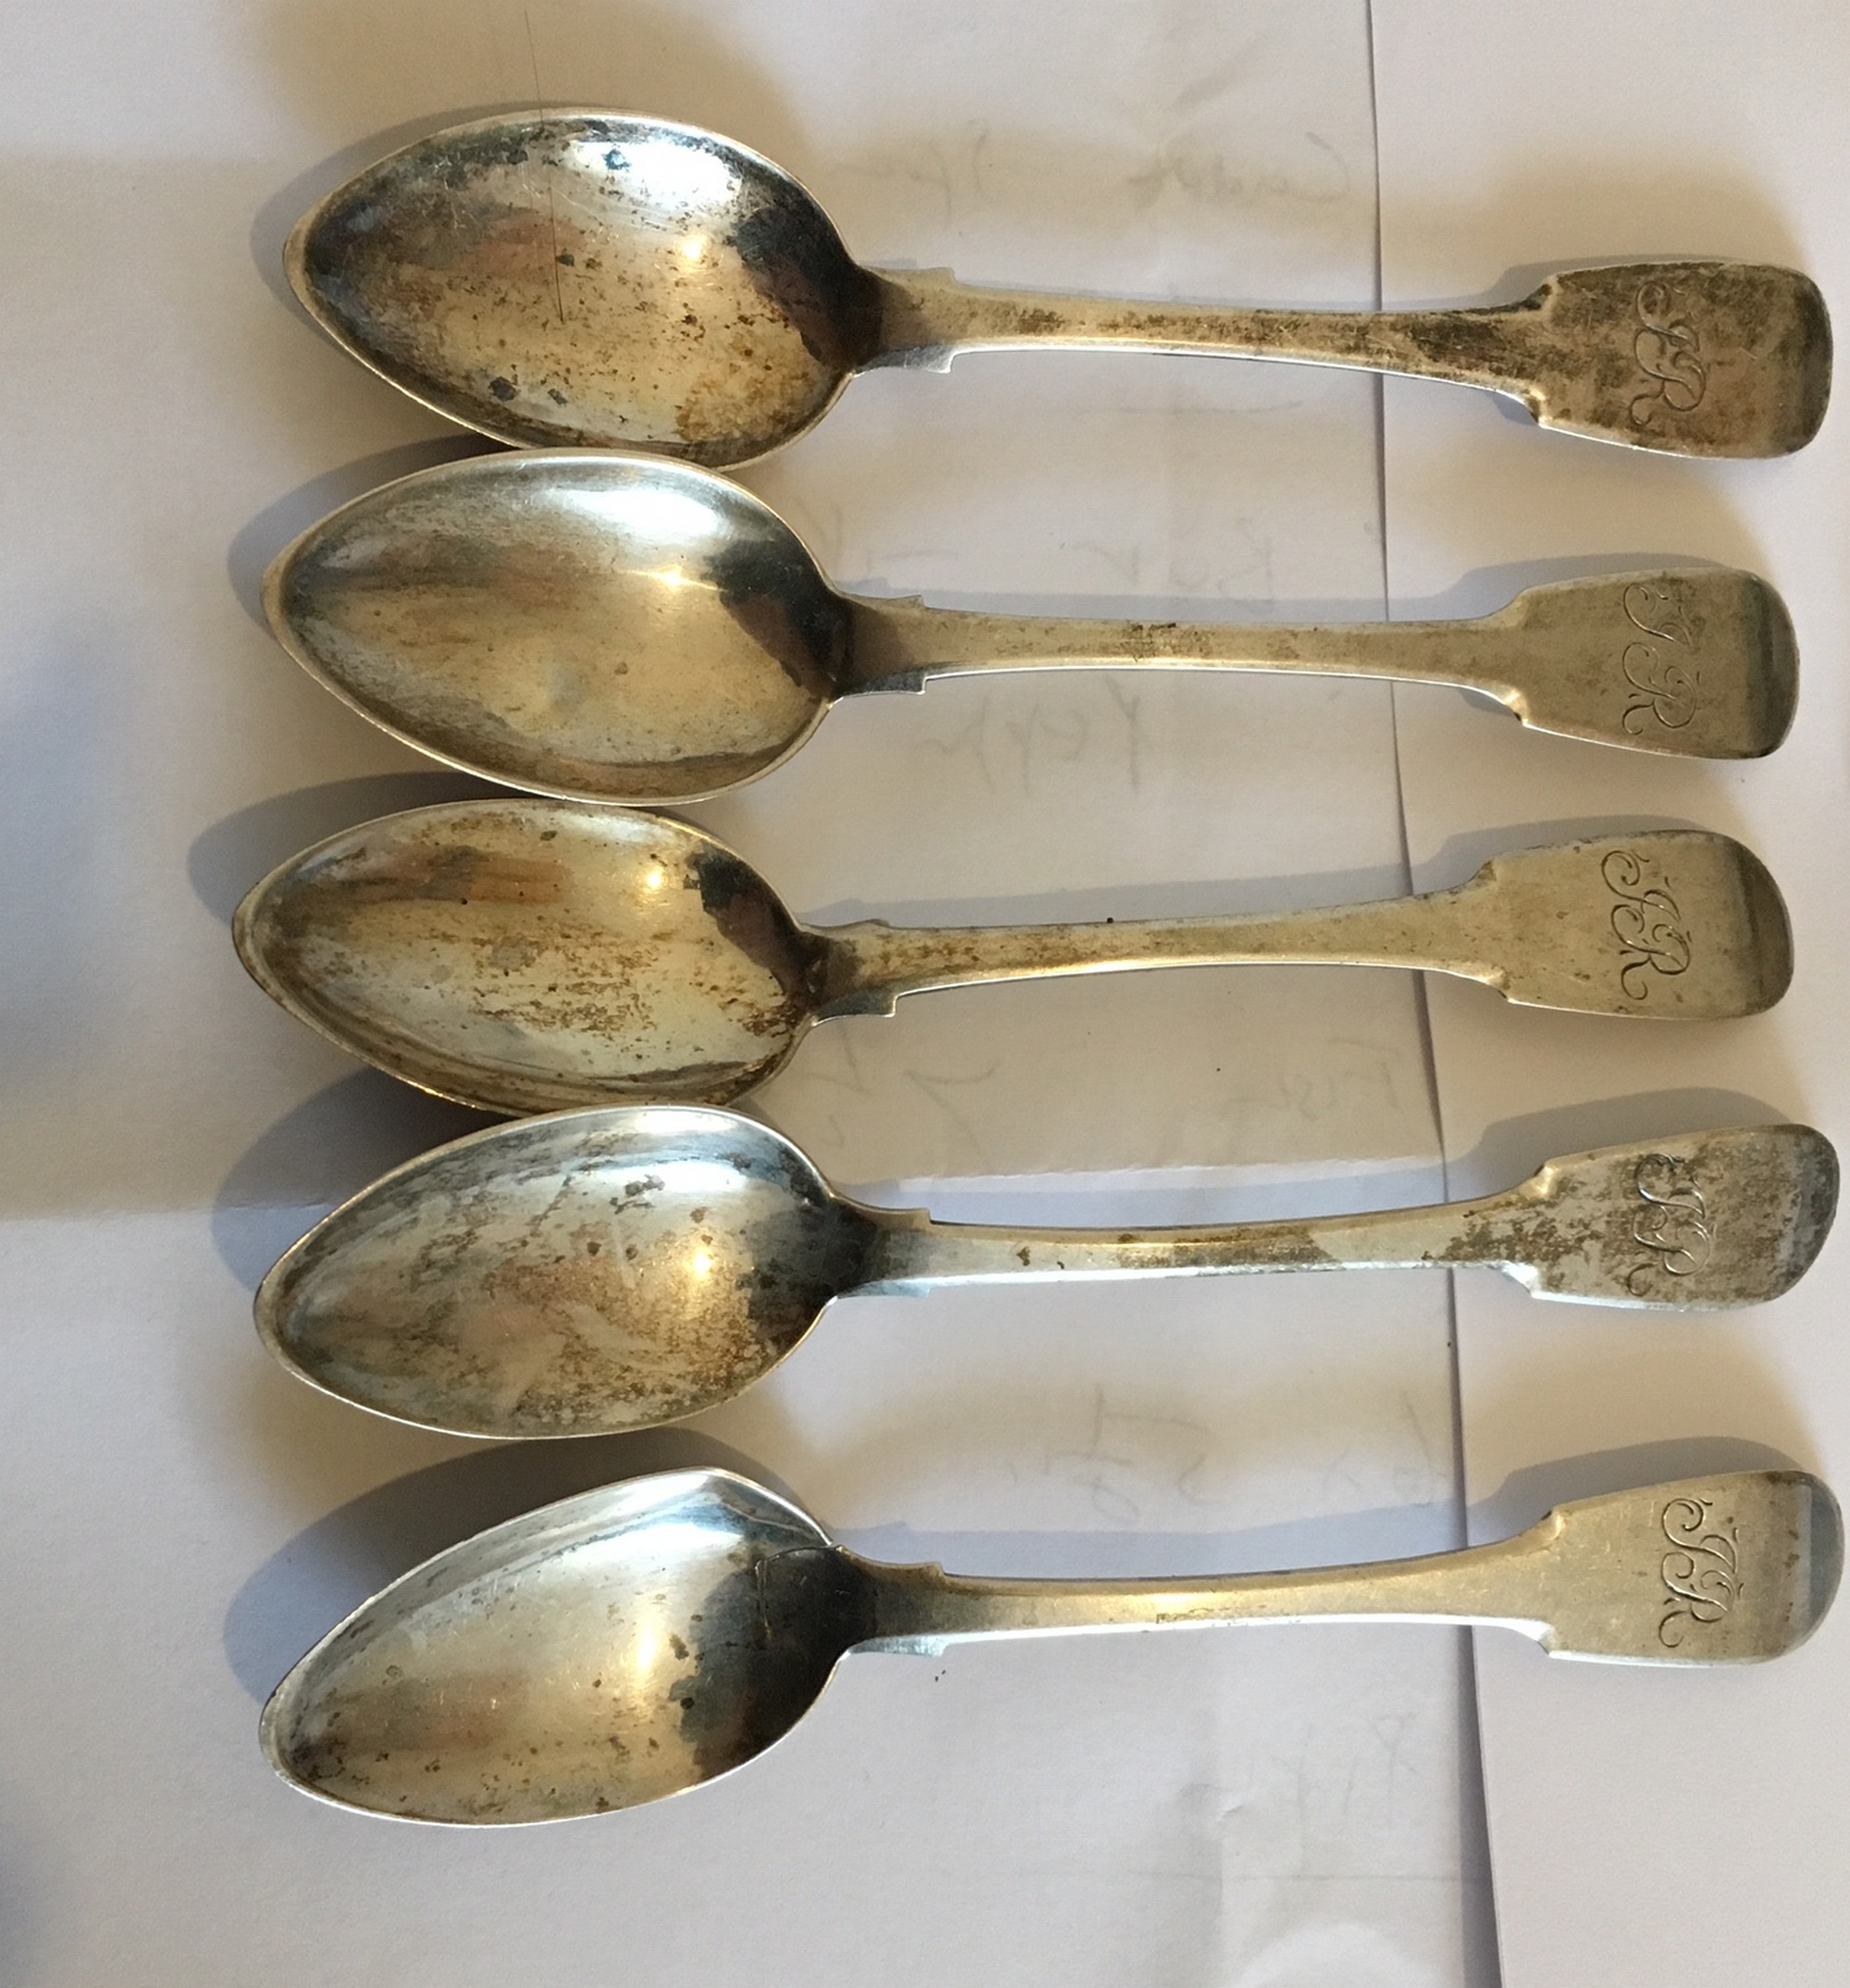 Lot of some 600 grams of Antique/Vintage Silver Spoons and White Metal Forks? - Image 9 of 16